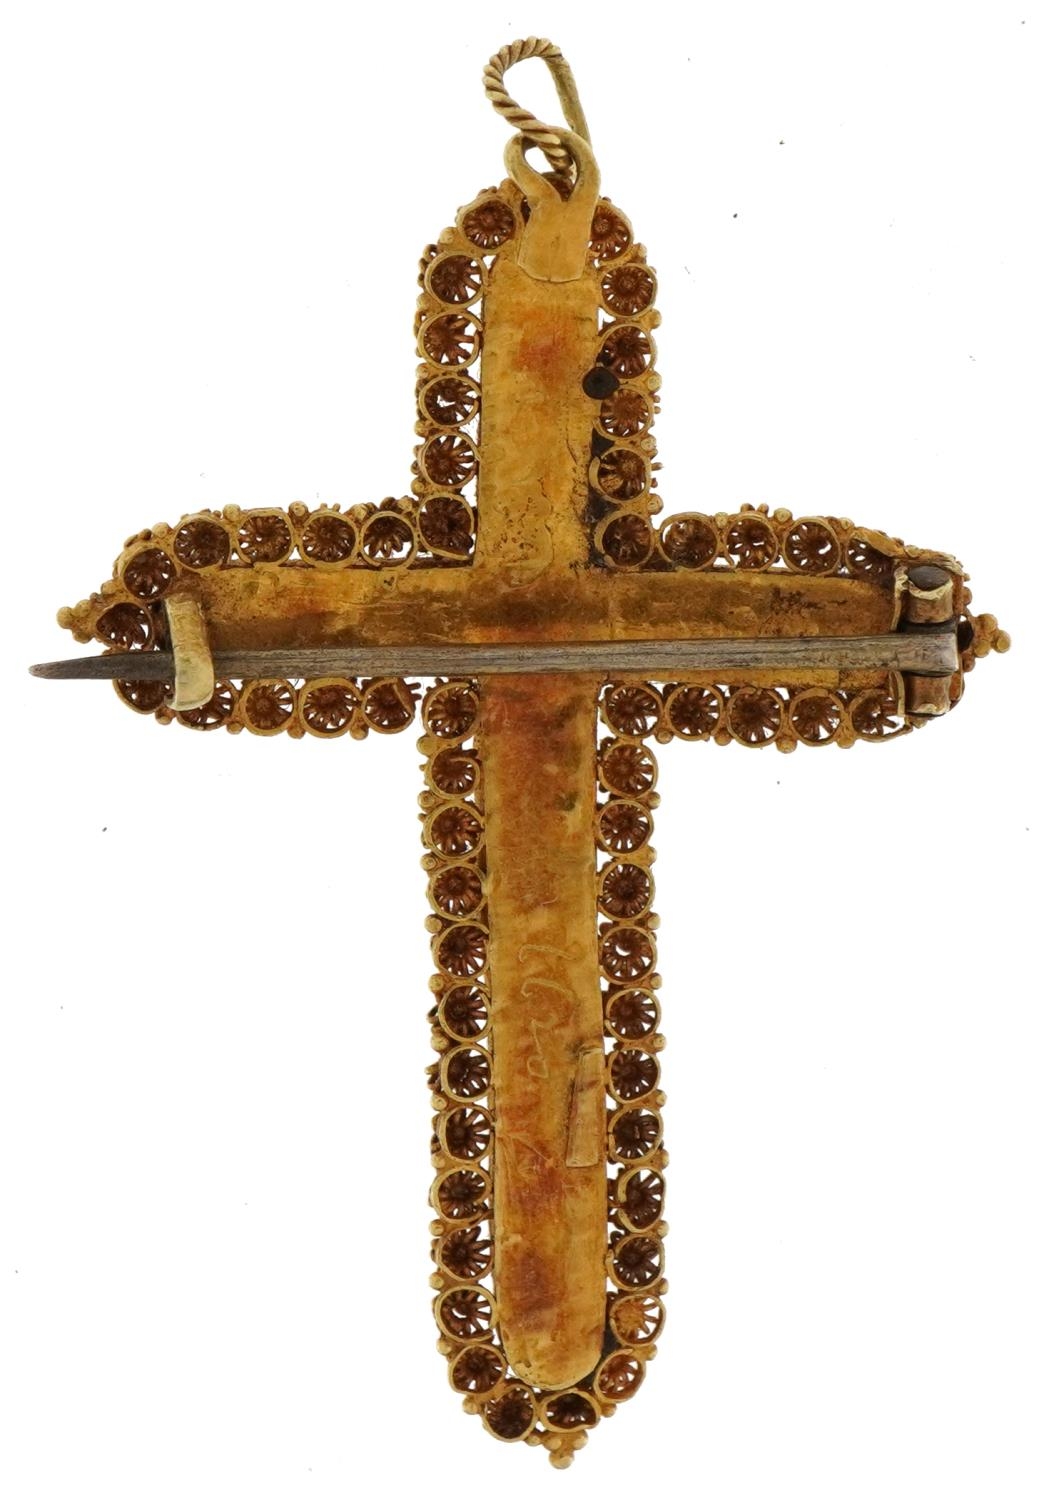 Antique Renaissance revival unmarked gold and turquoise filigree cross pendant brooch, tests as 15ct - Image 2 of 2